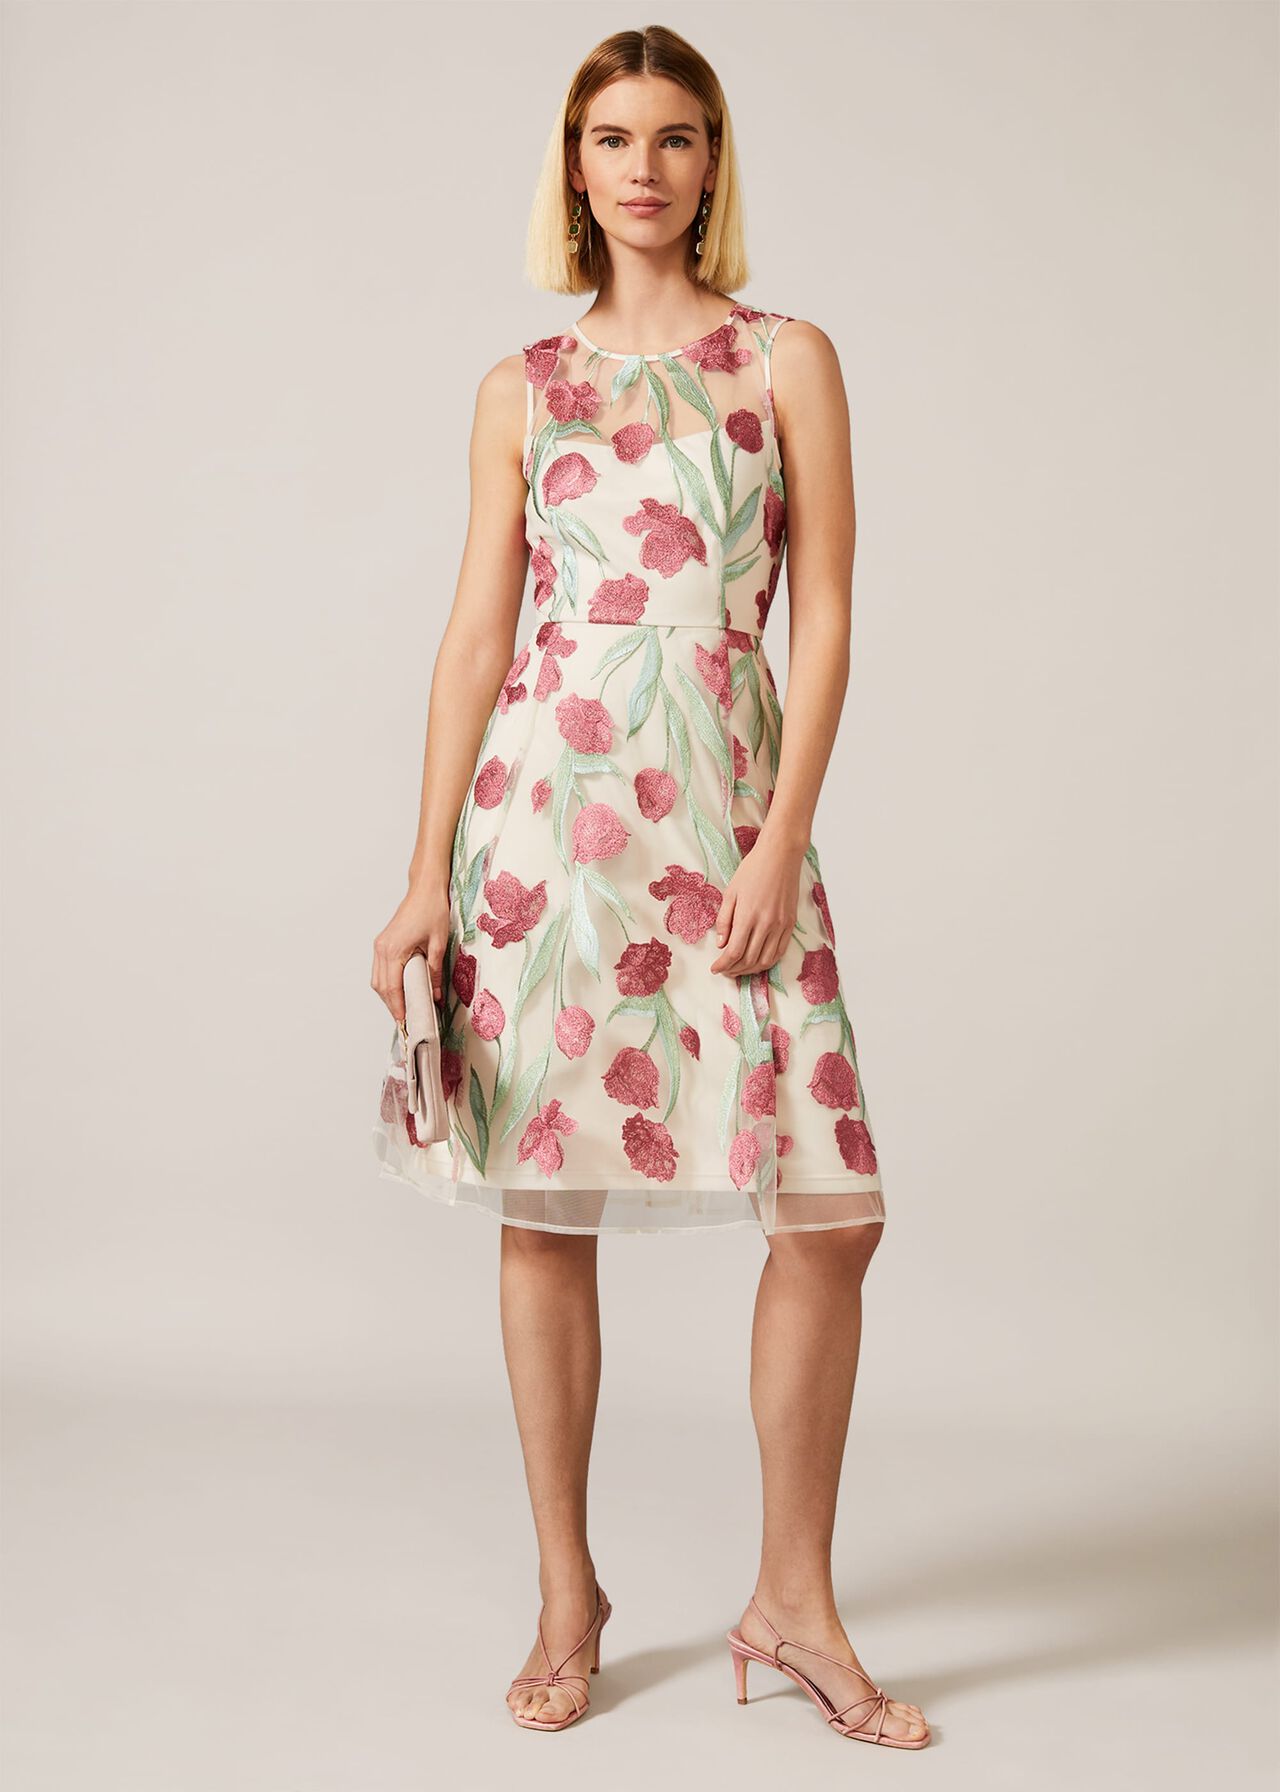 Shae Floral Embroidered Dress